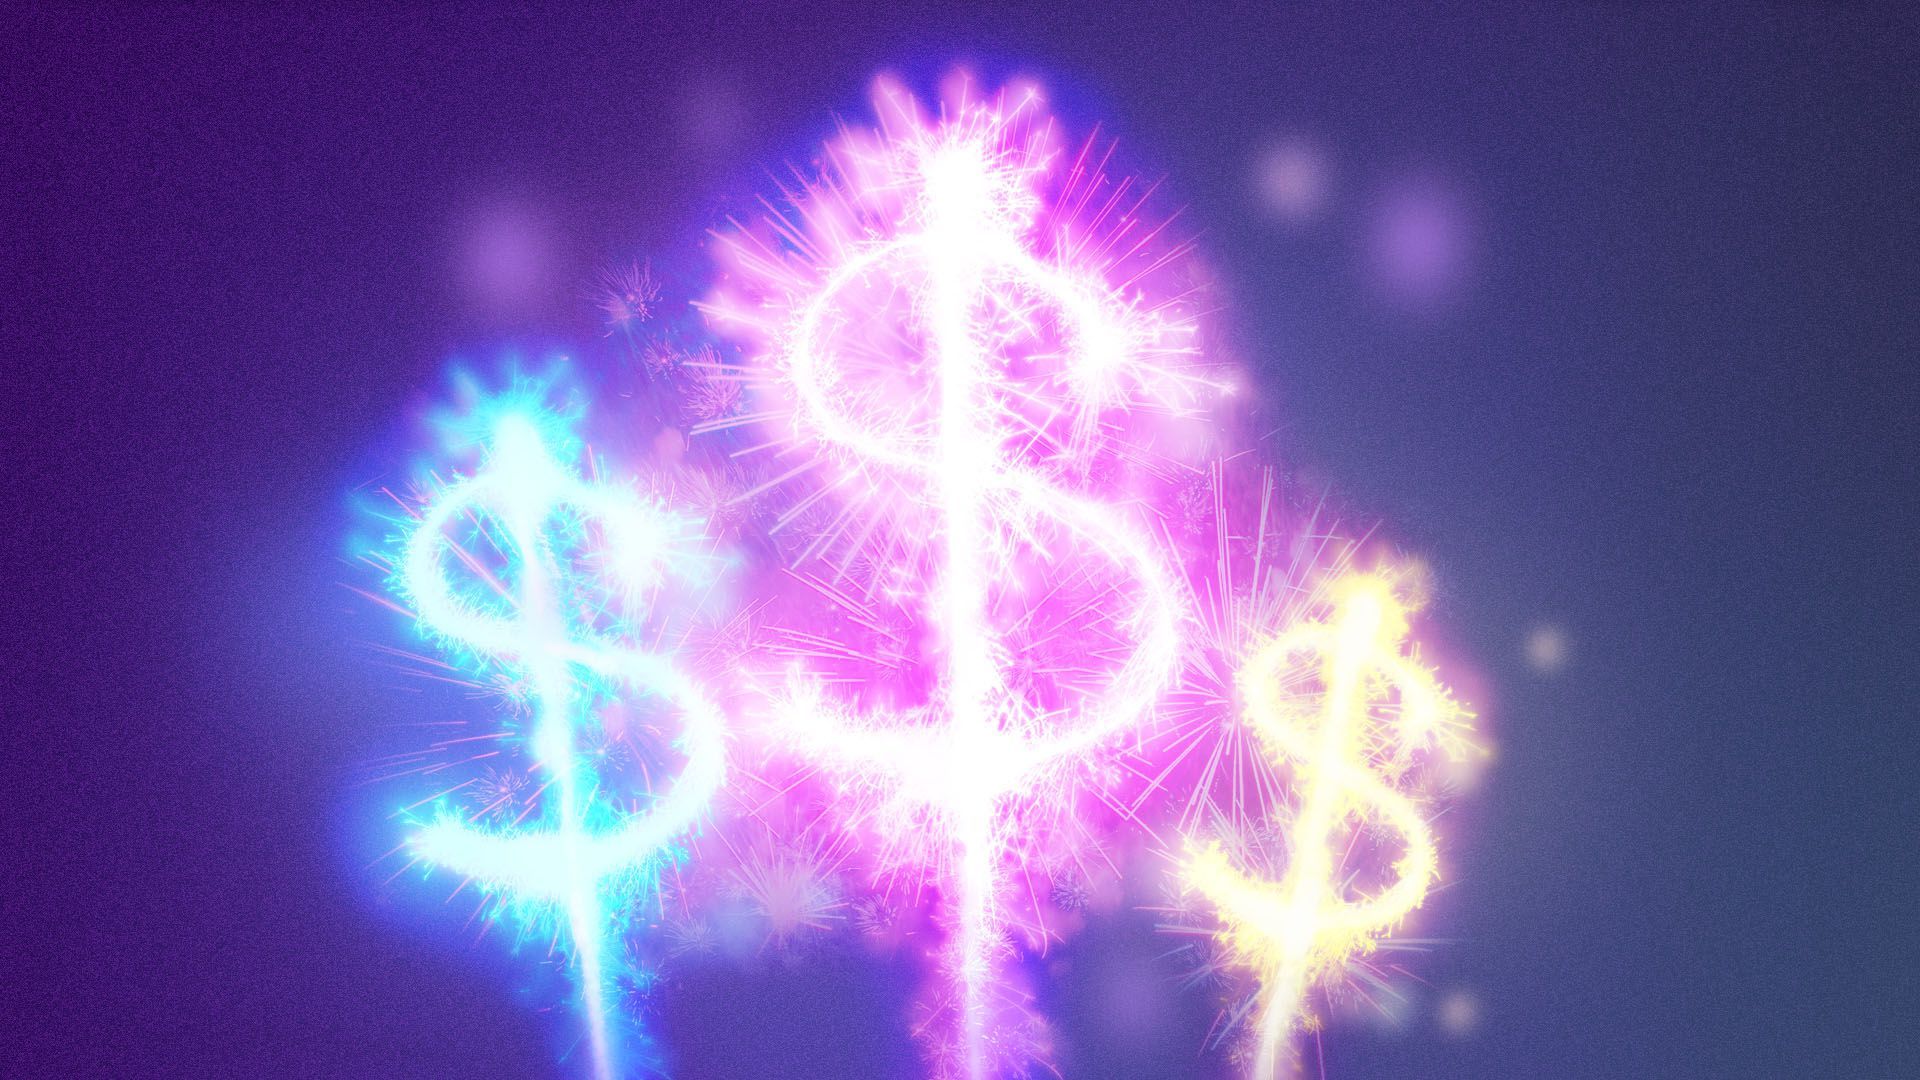 Illustration of fireworks in the shape of dollar signs